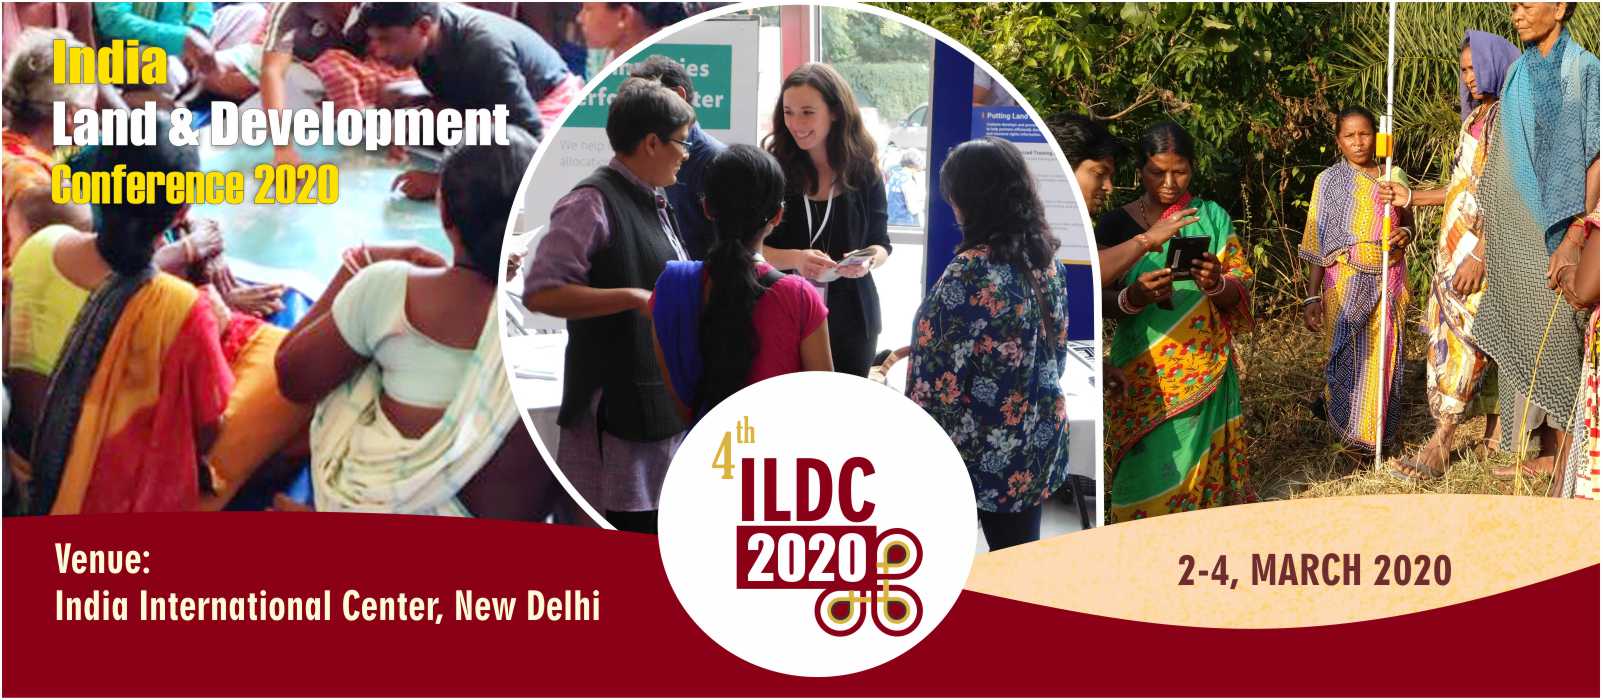 India Land and Development Conference 2020